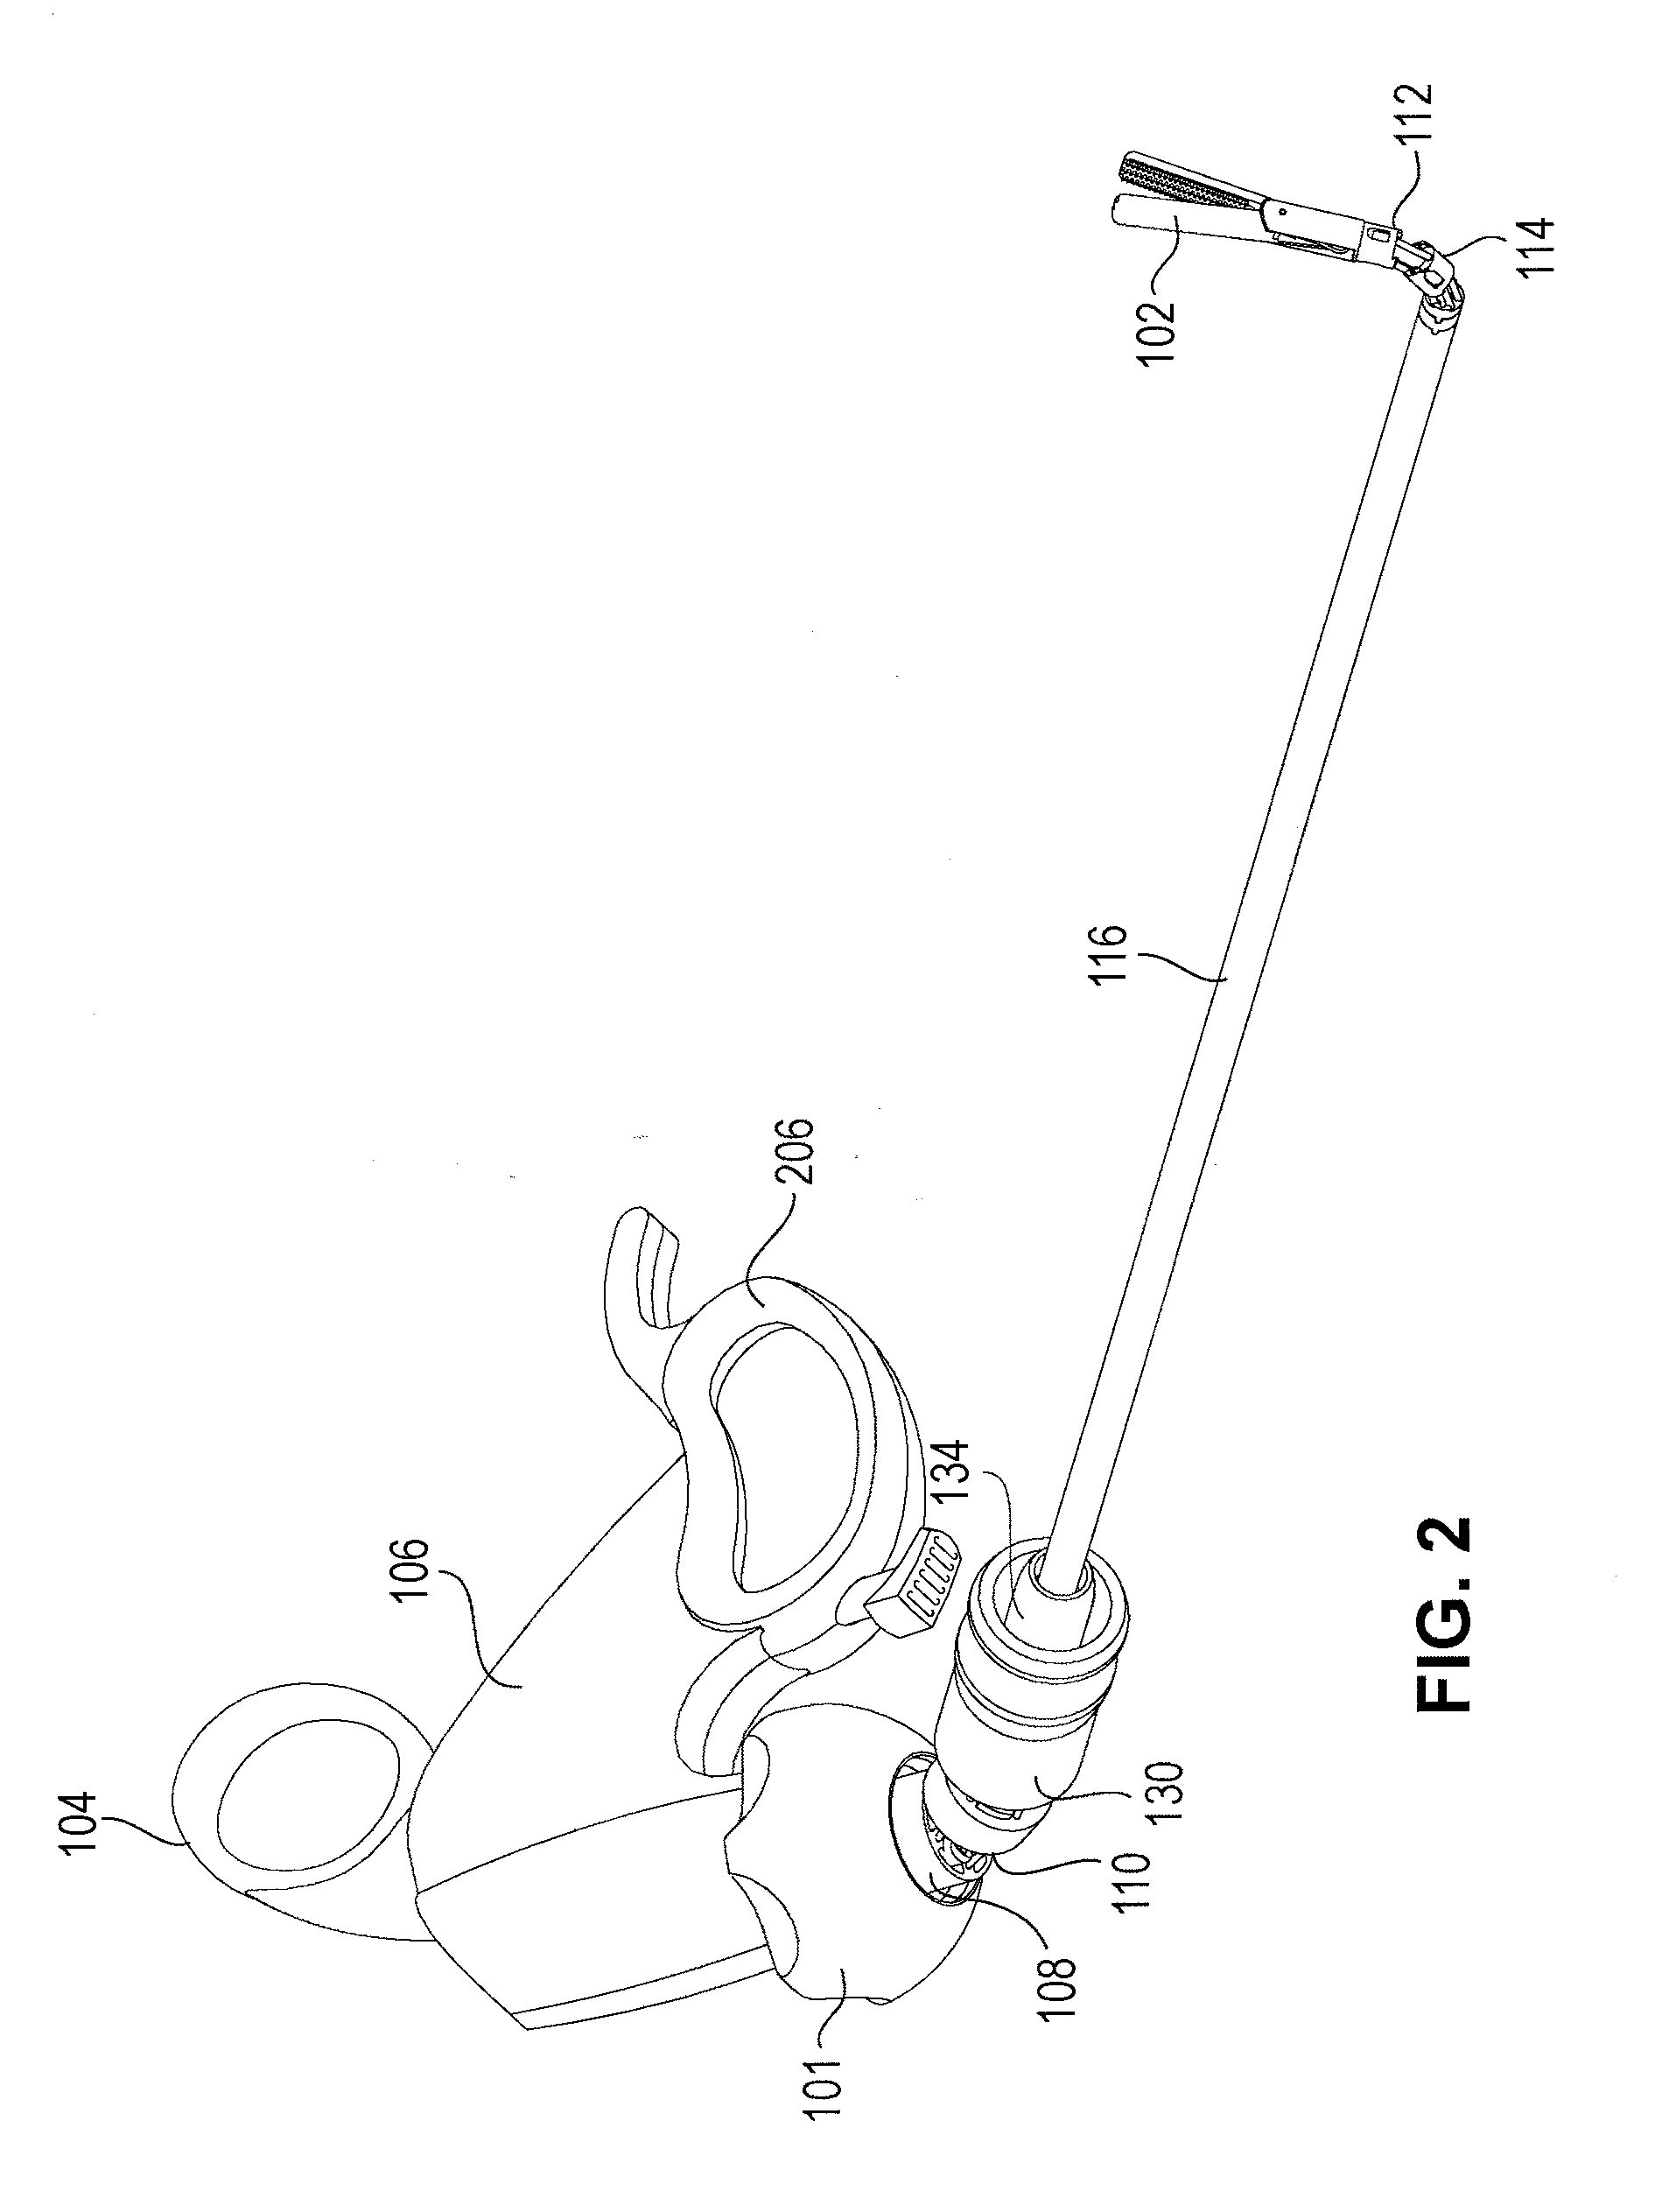 Tool with multi-state ratcheted end effector